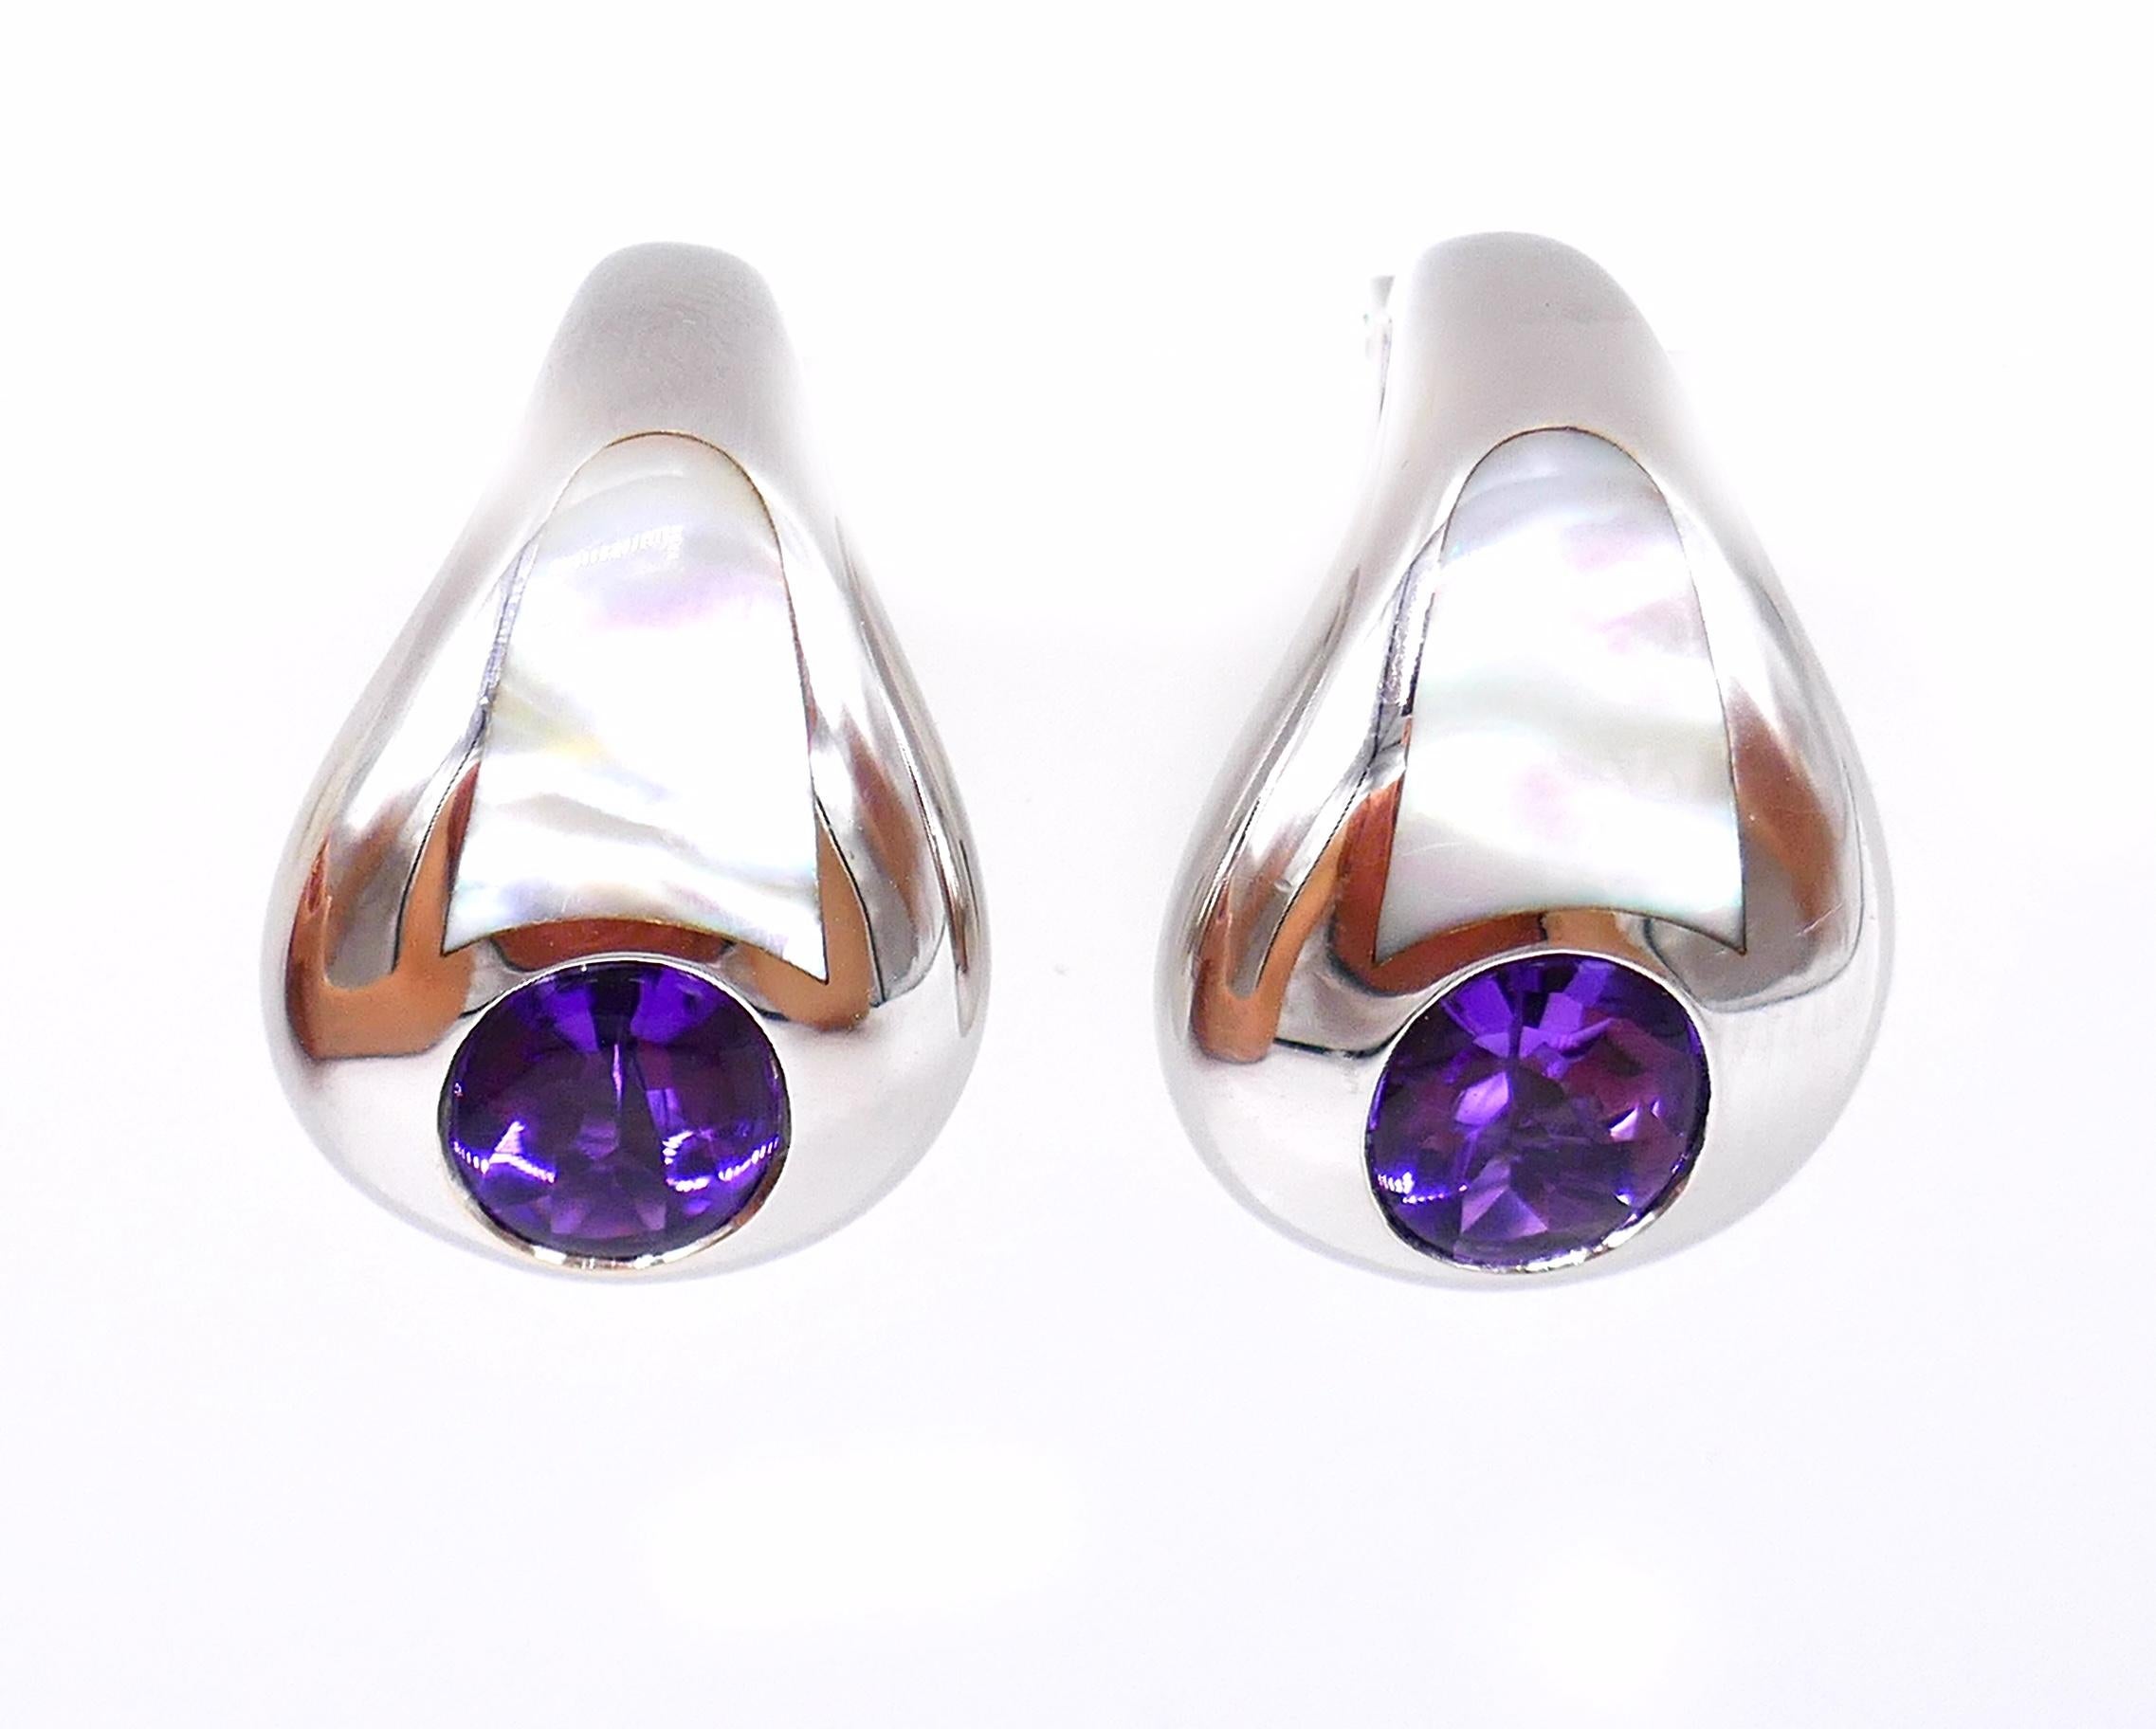 Vintage clip-on earrings by Mauboussin made of 18k white gold featuring amethyst and mother of pearl. Stamped with the Mauboussin maker's marks, a hallmark for 18k gold and a serial number. 
Measurements: 7/8